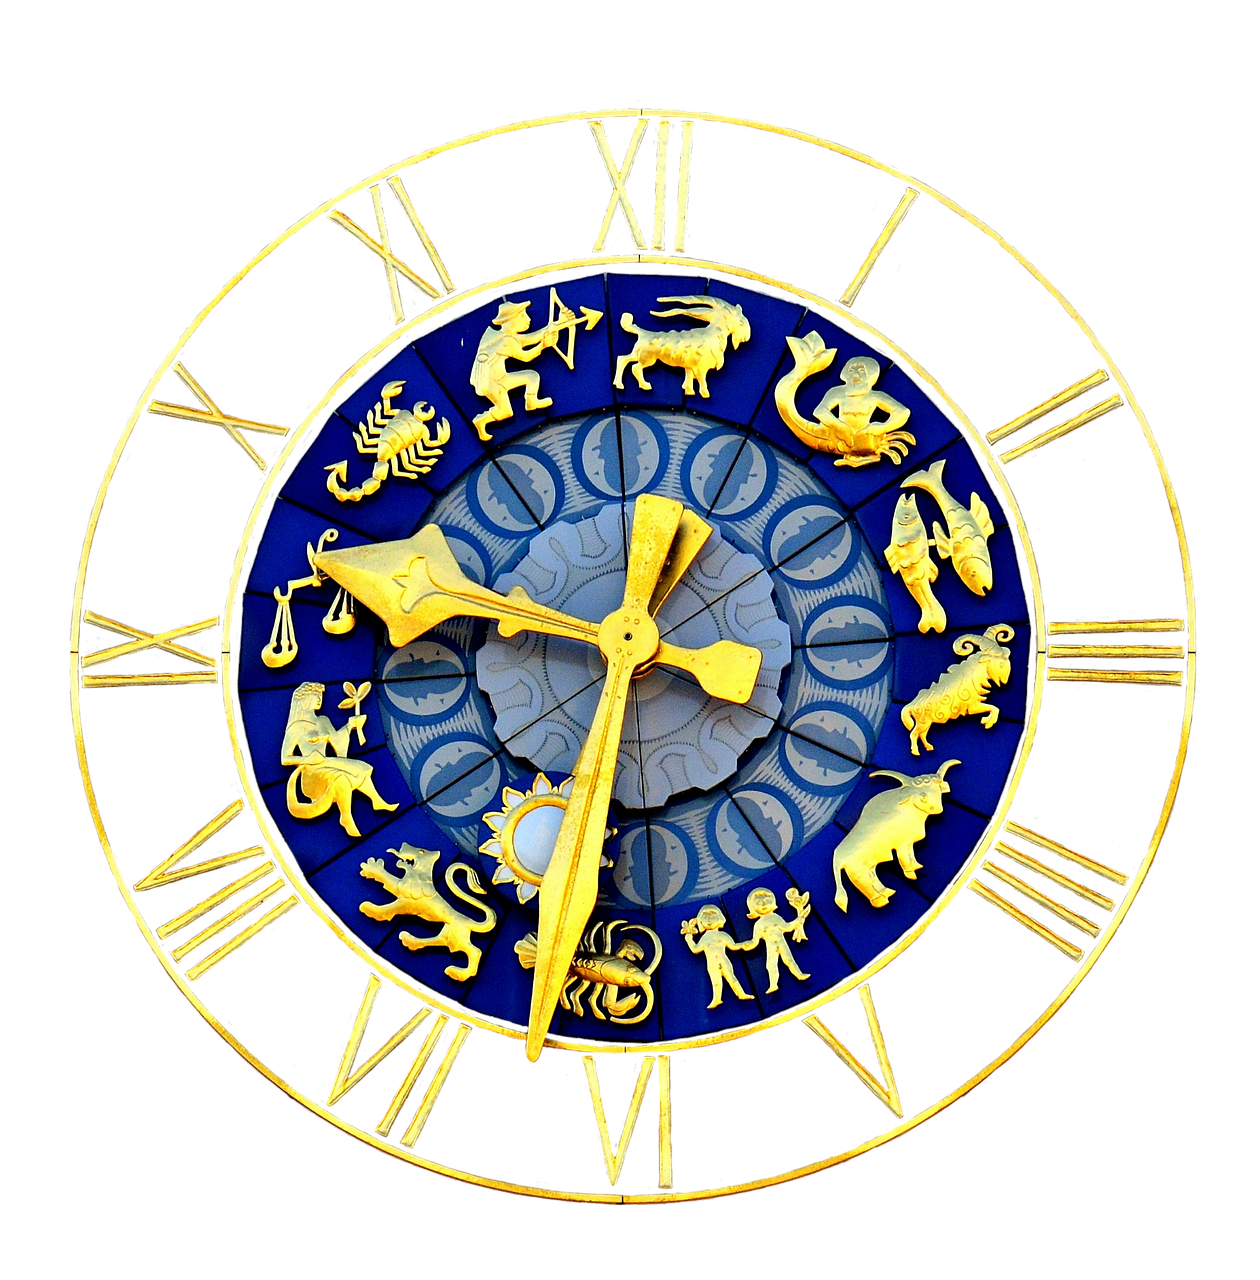 Download free photo of Clock zodiac sign time of pointer dial gold